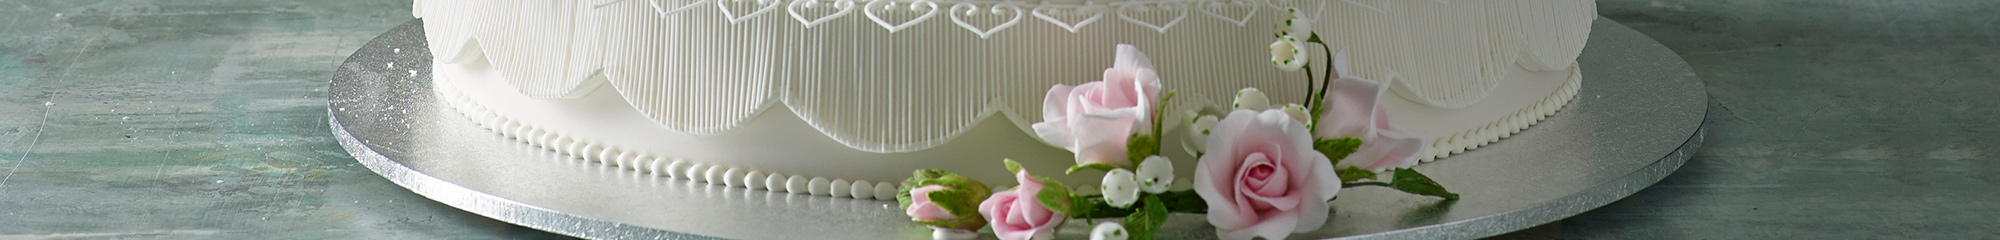 View cake design and decoration courses